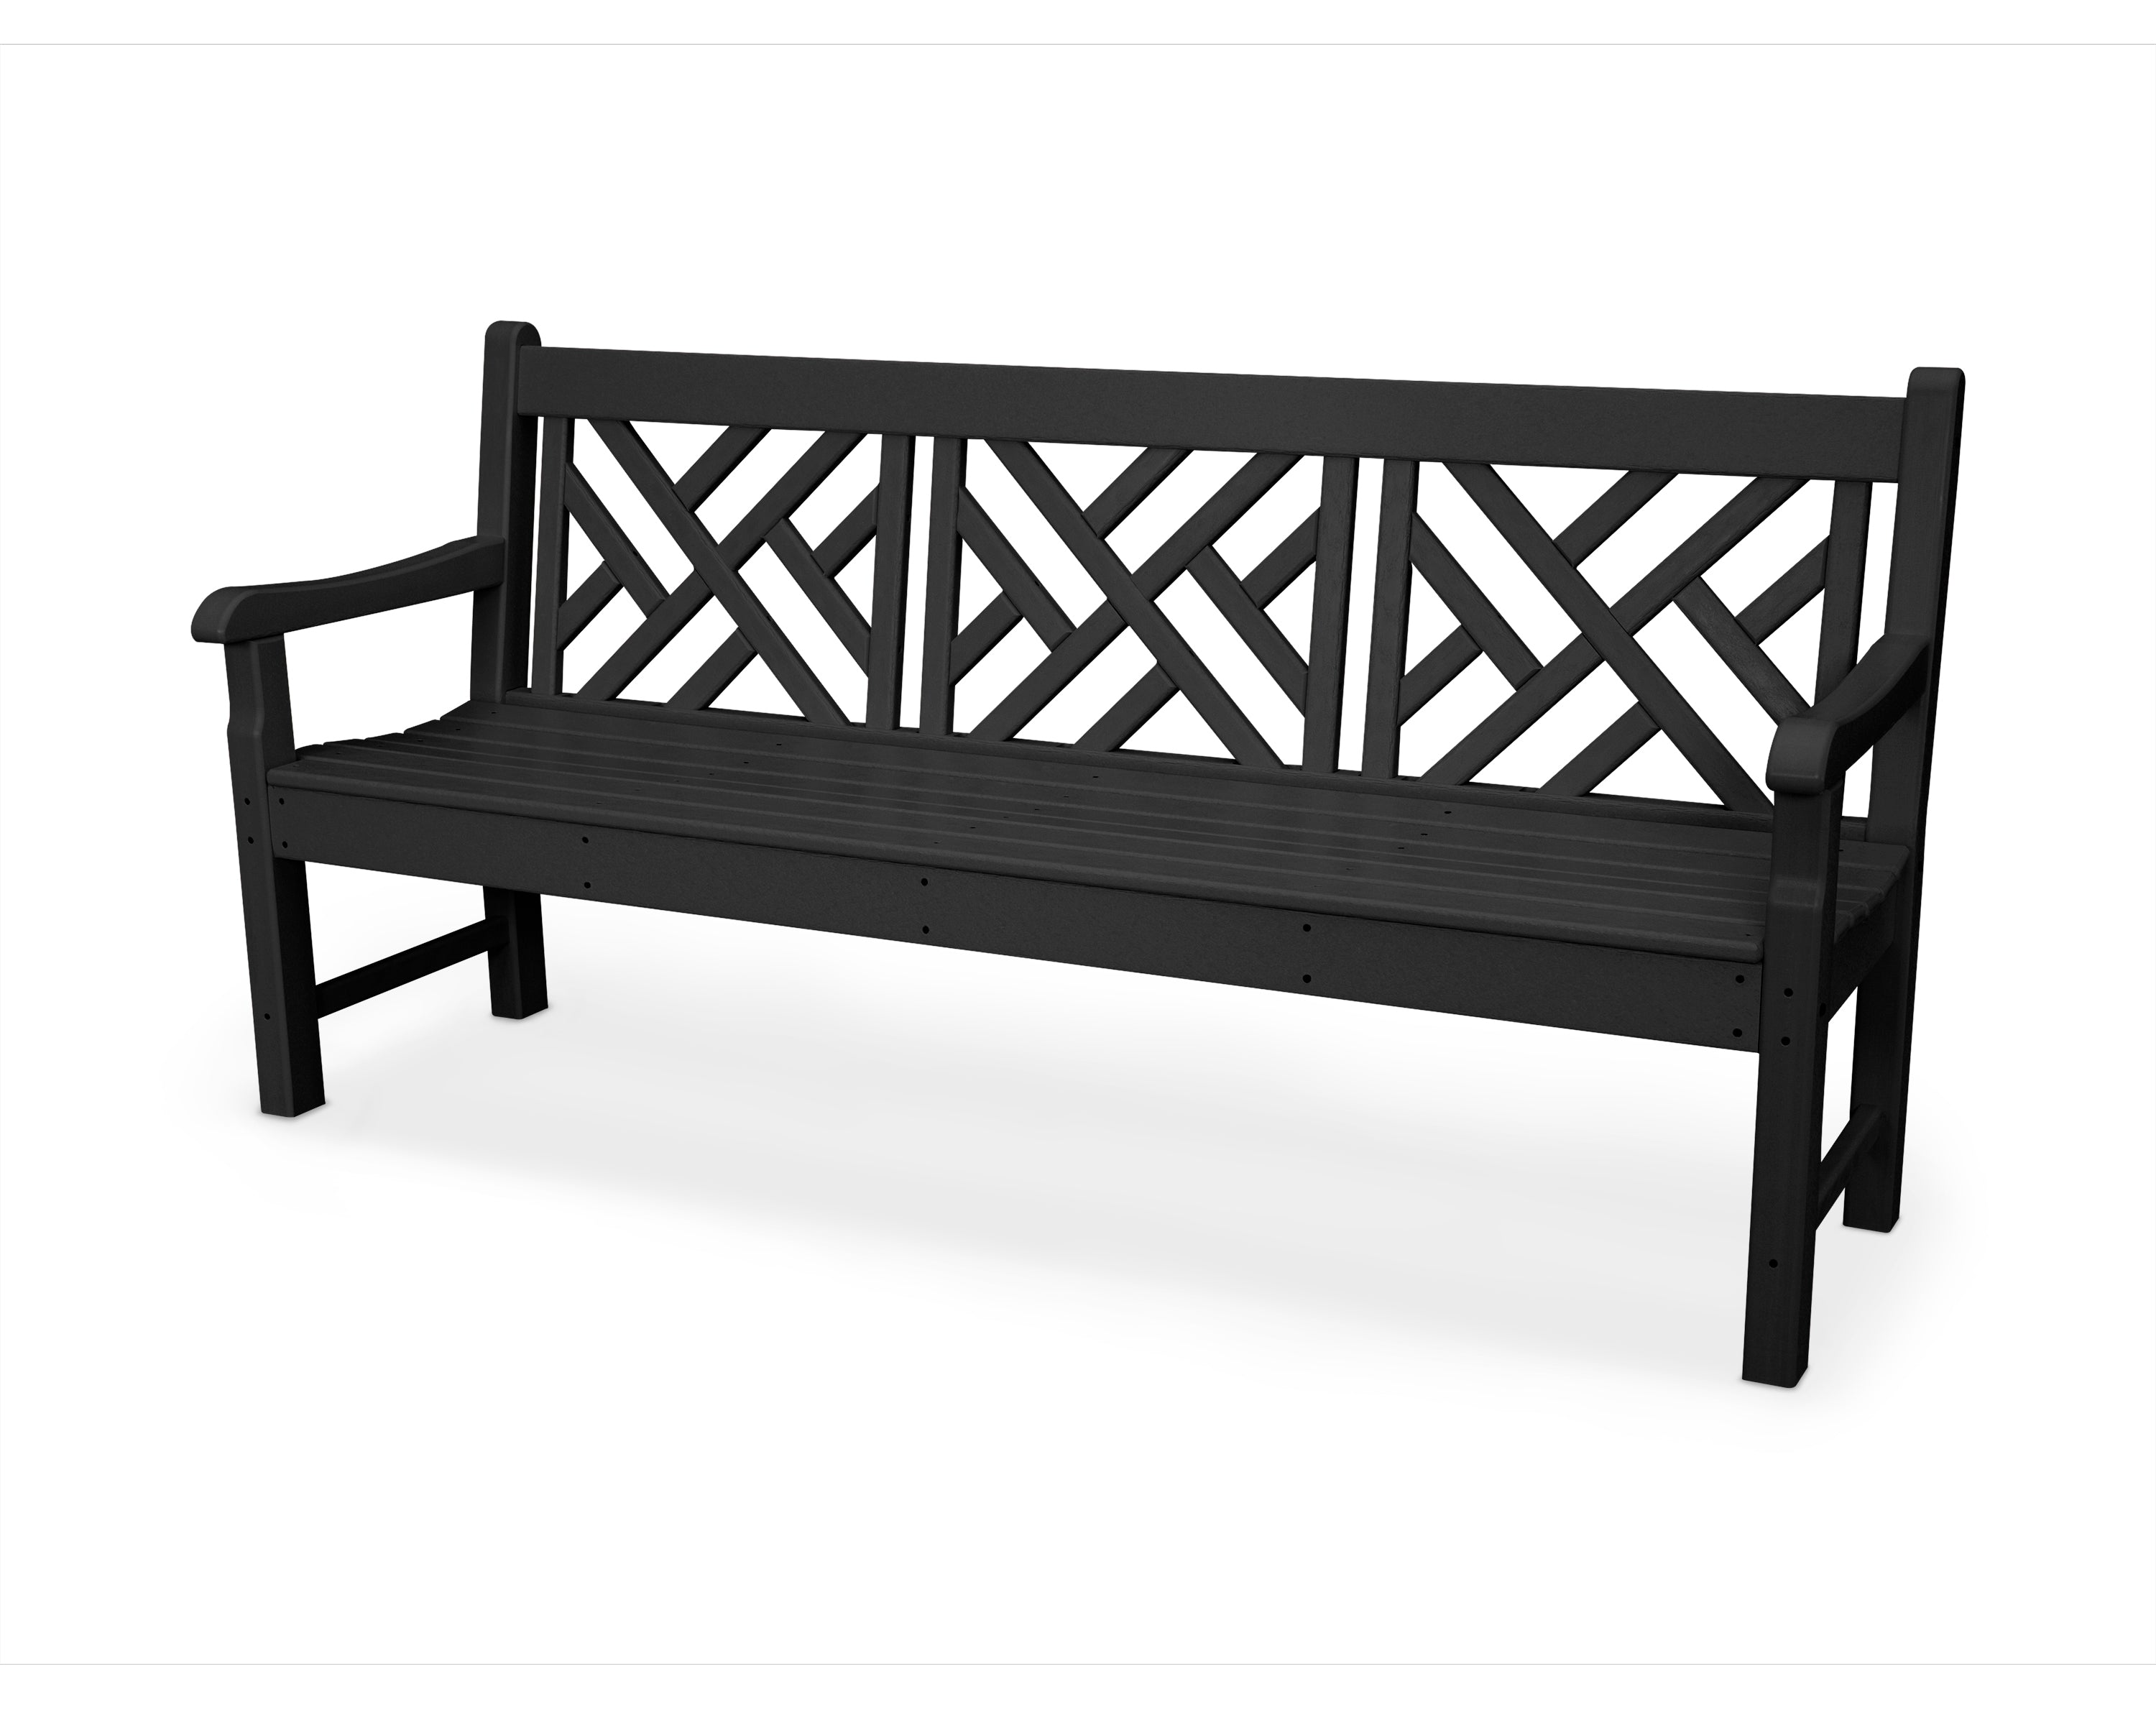 POLYWOOD® Rockford 72" Chippendale Bench in Black